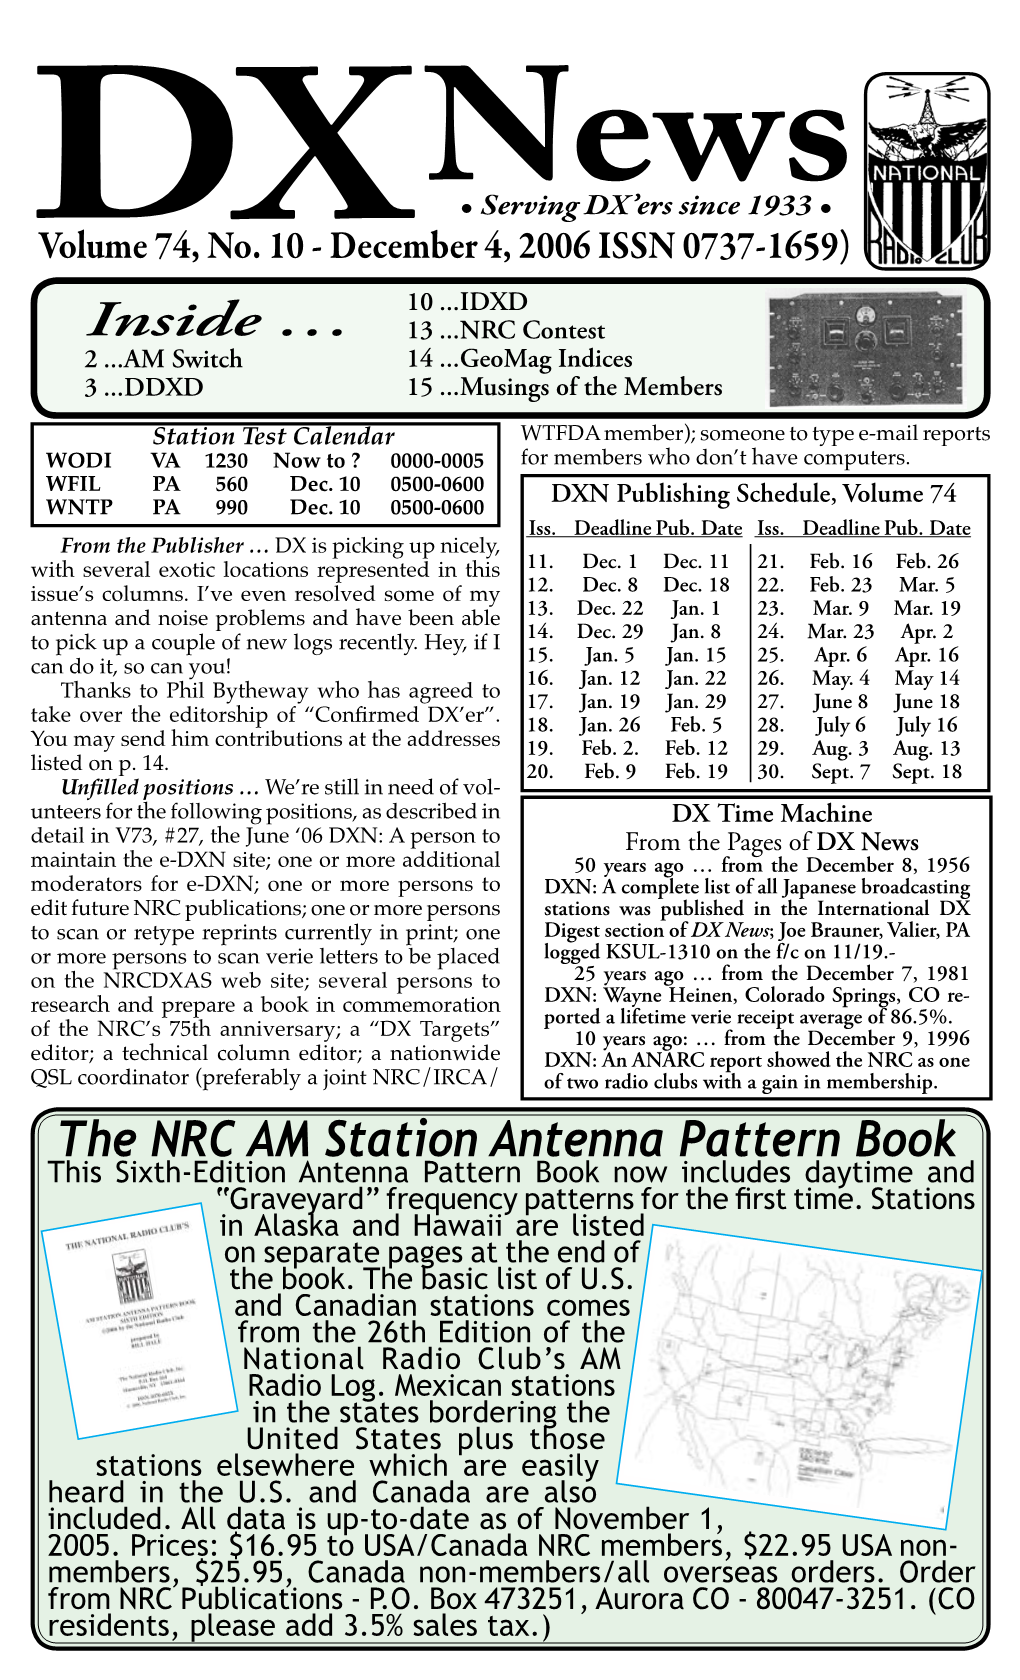 The NRC AM Station Antenna Pattern Book This Sixth-Edition Antenna Pattern Book Now Includes Daytime and “Graveyard” Frequency Patterns for the First Time